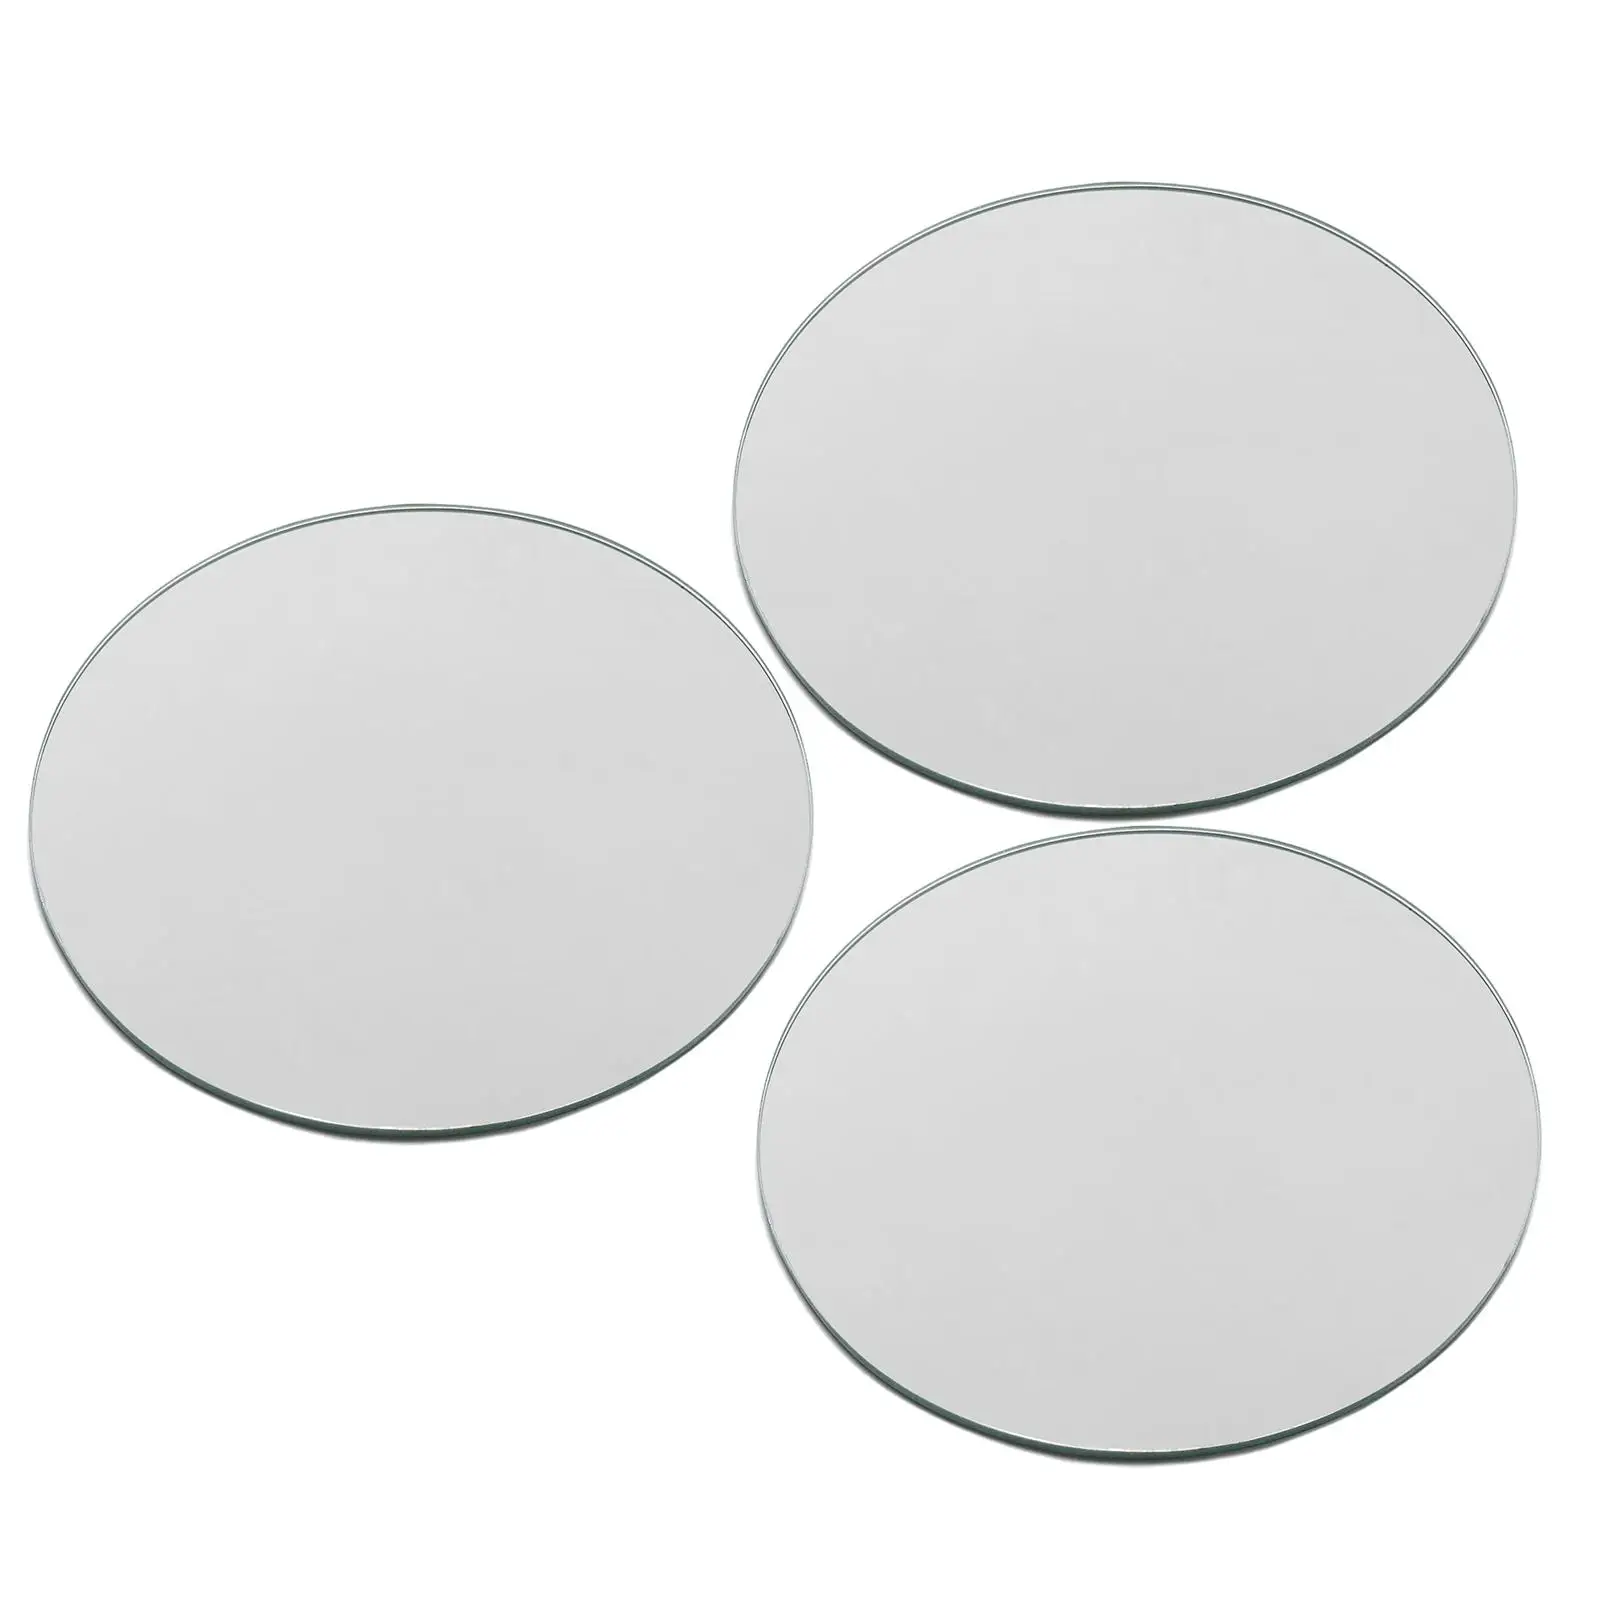 Round Mirror Plate Candle Plate Decorative Mirror Trays for Wedding Centerpieces